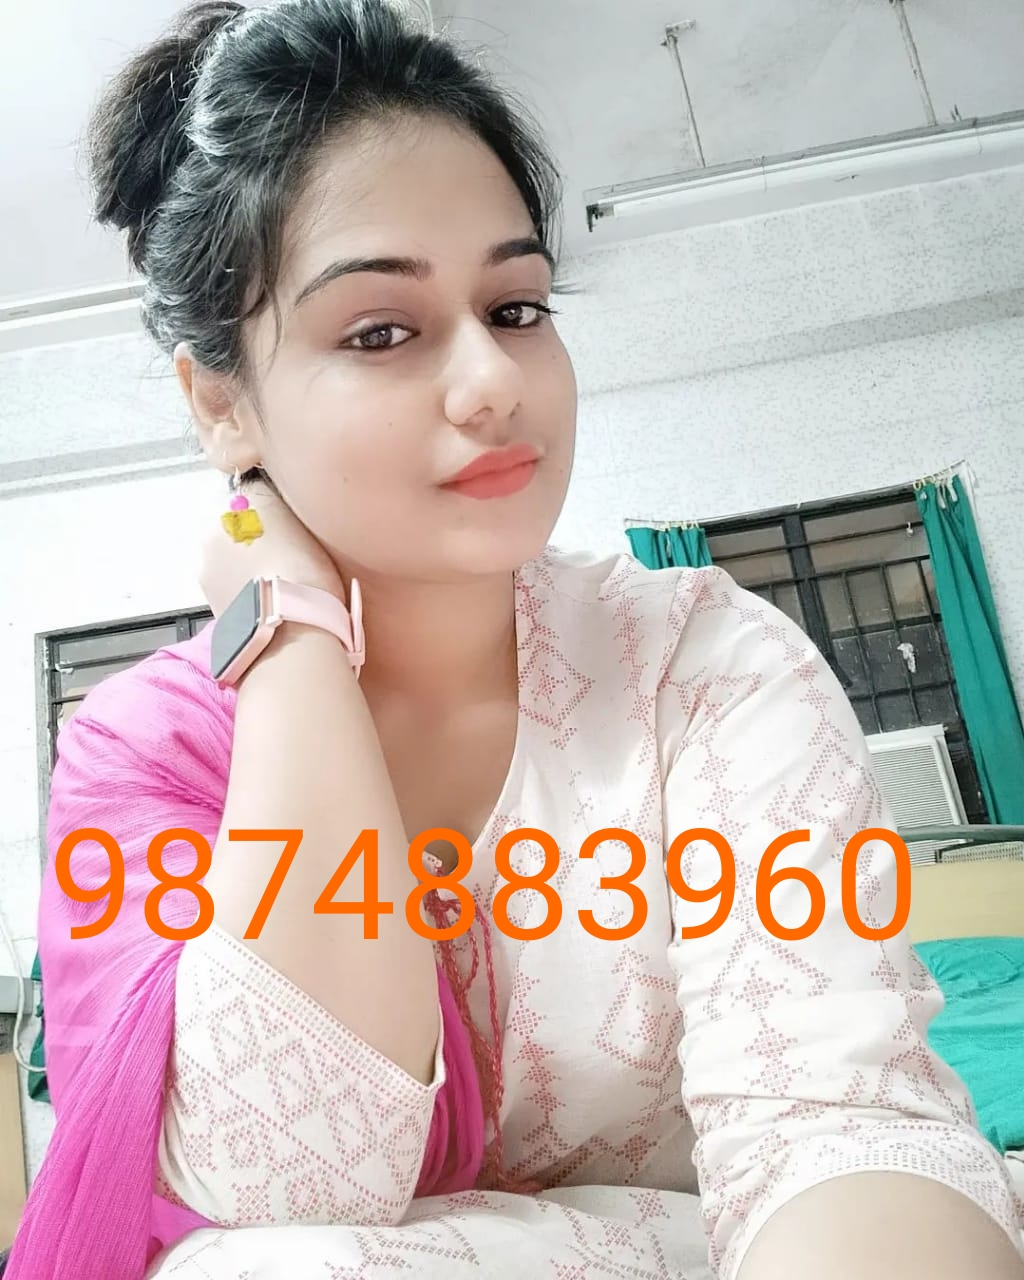 Tirupati safe and secure independent college girl genuine young and tr